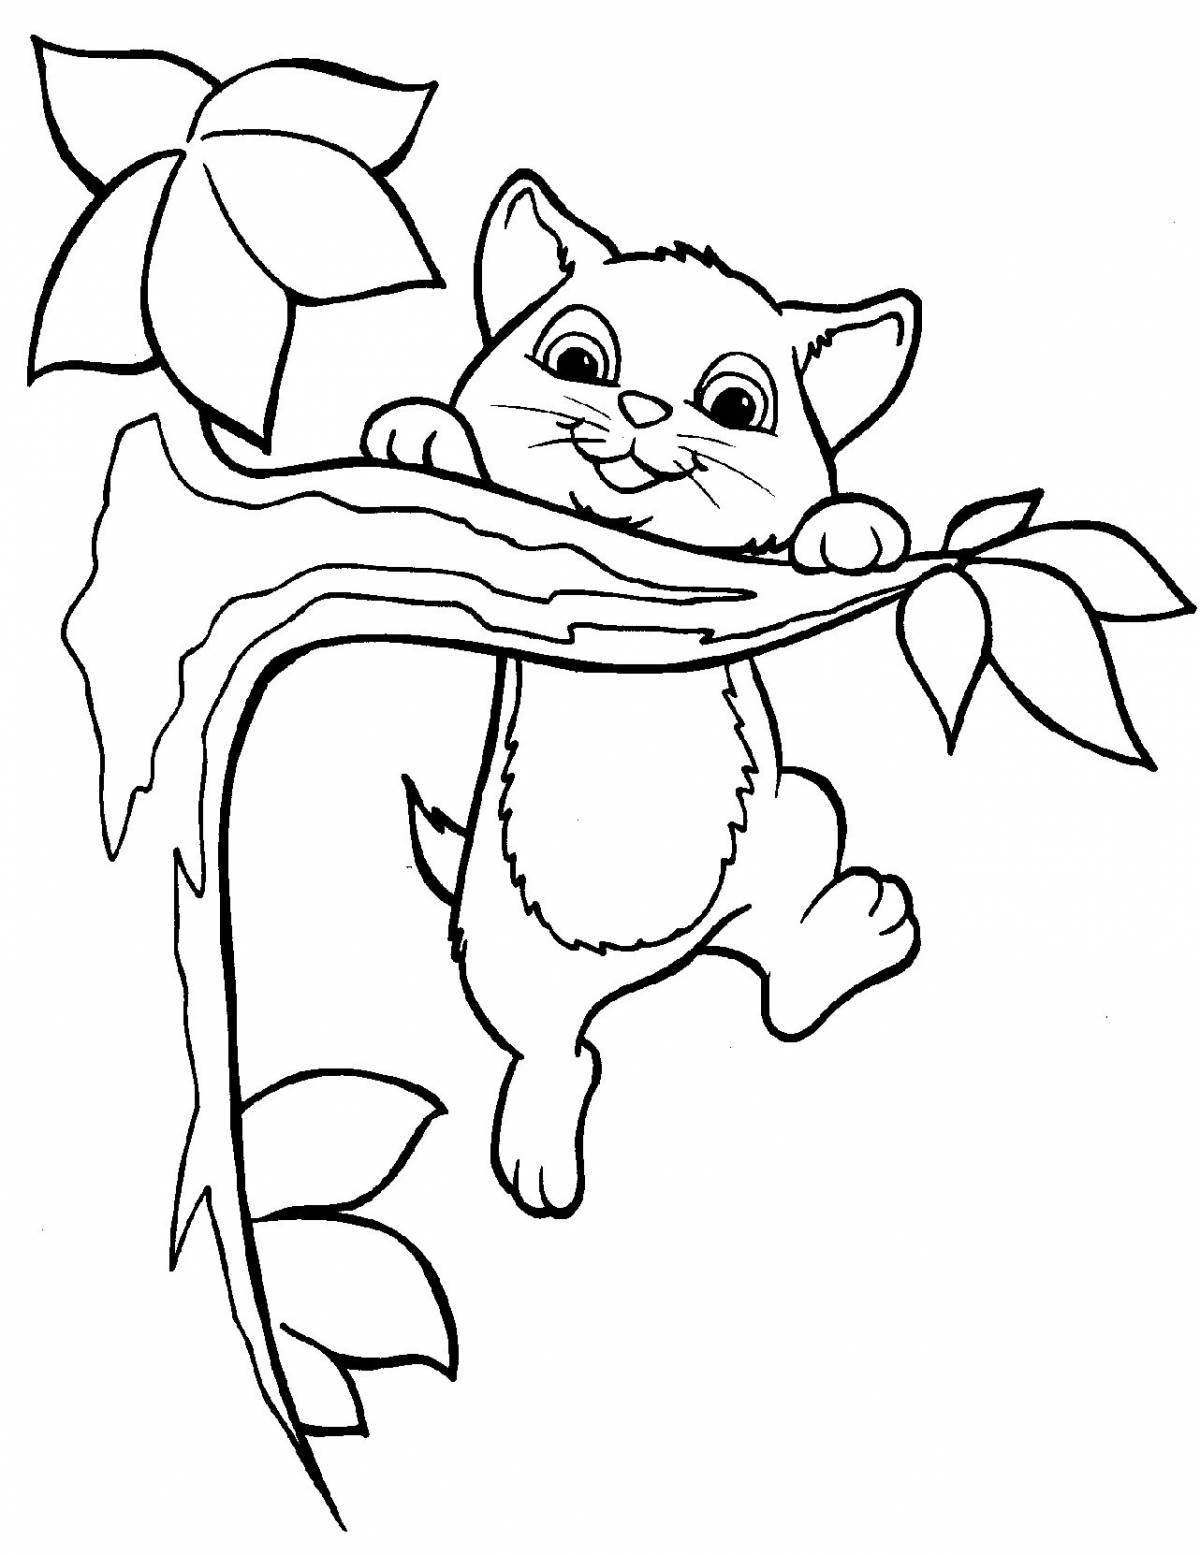 Cute kitten coloring page